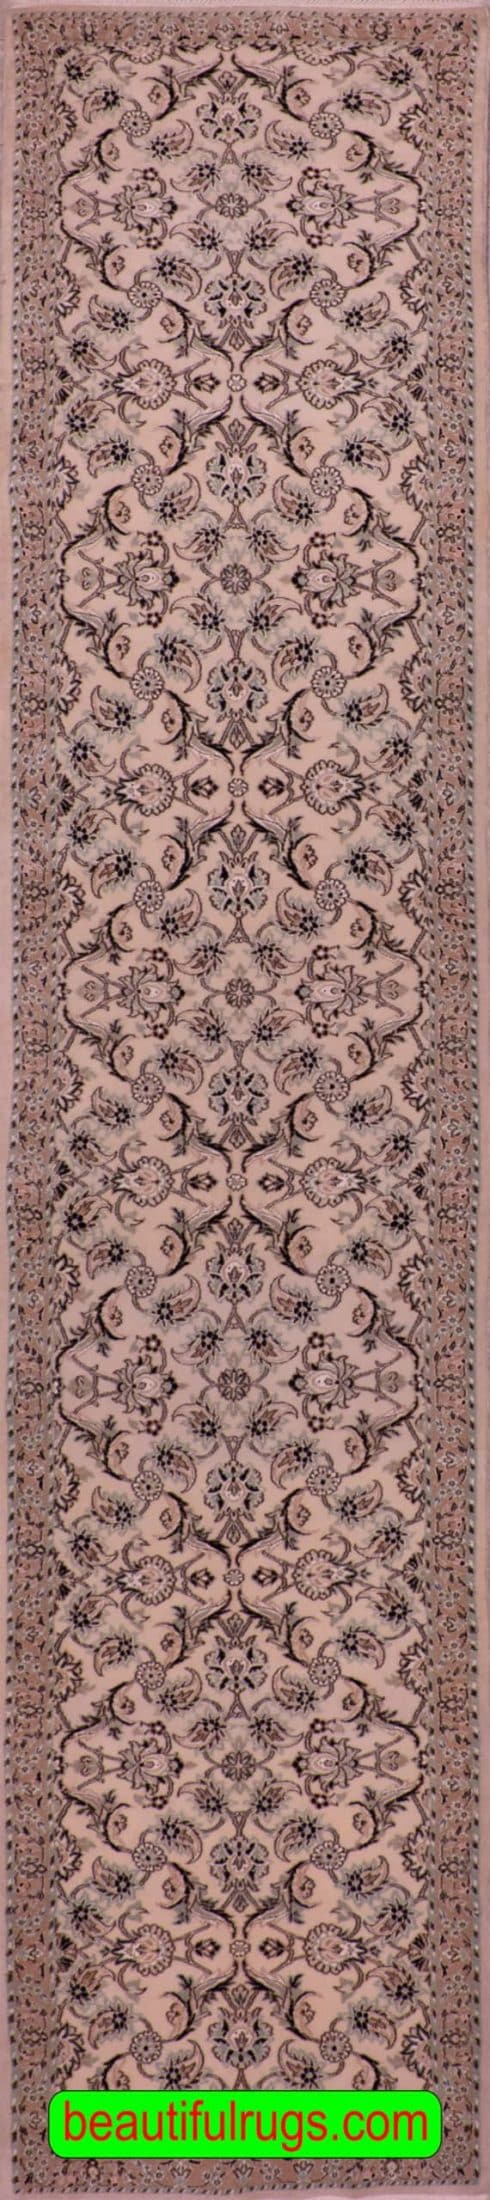 Beige color Persian runner rug for long hallway. Size 2.9x13.3